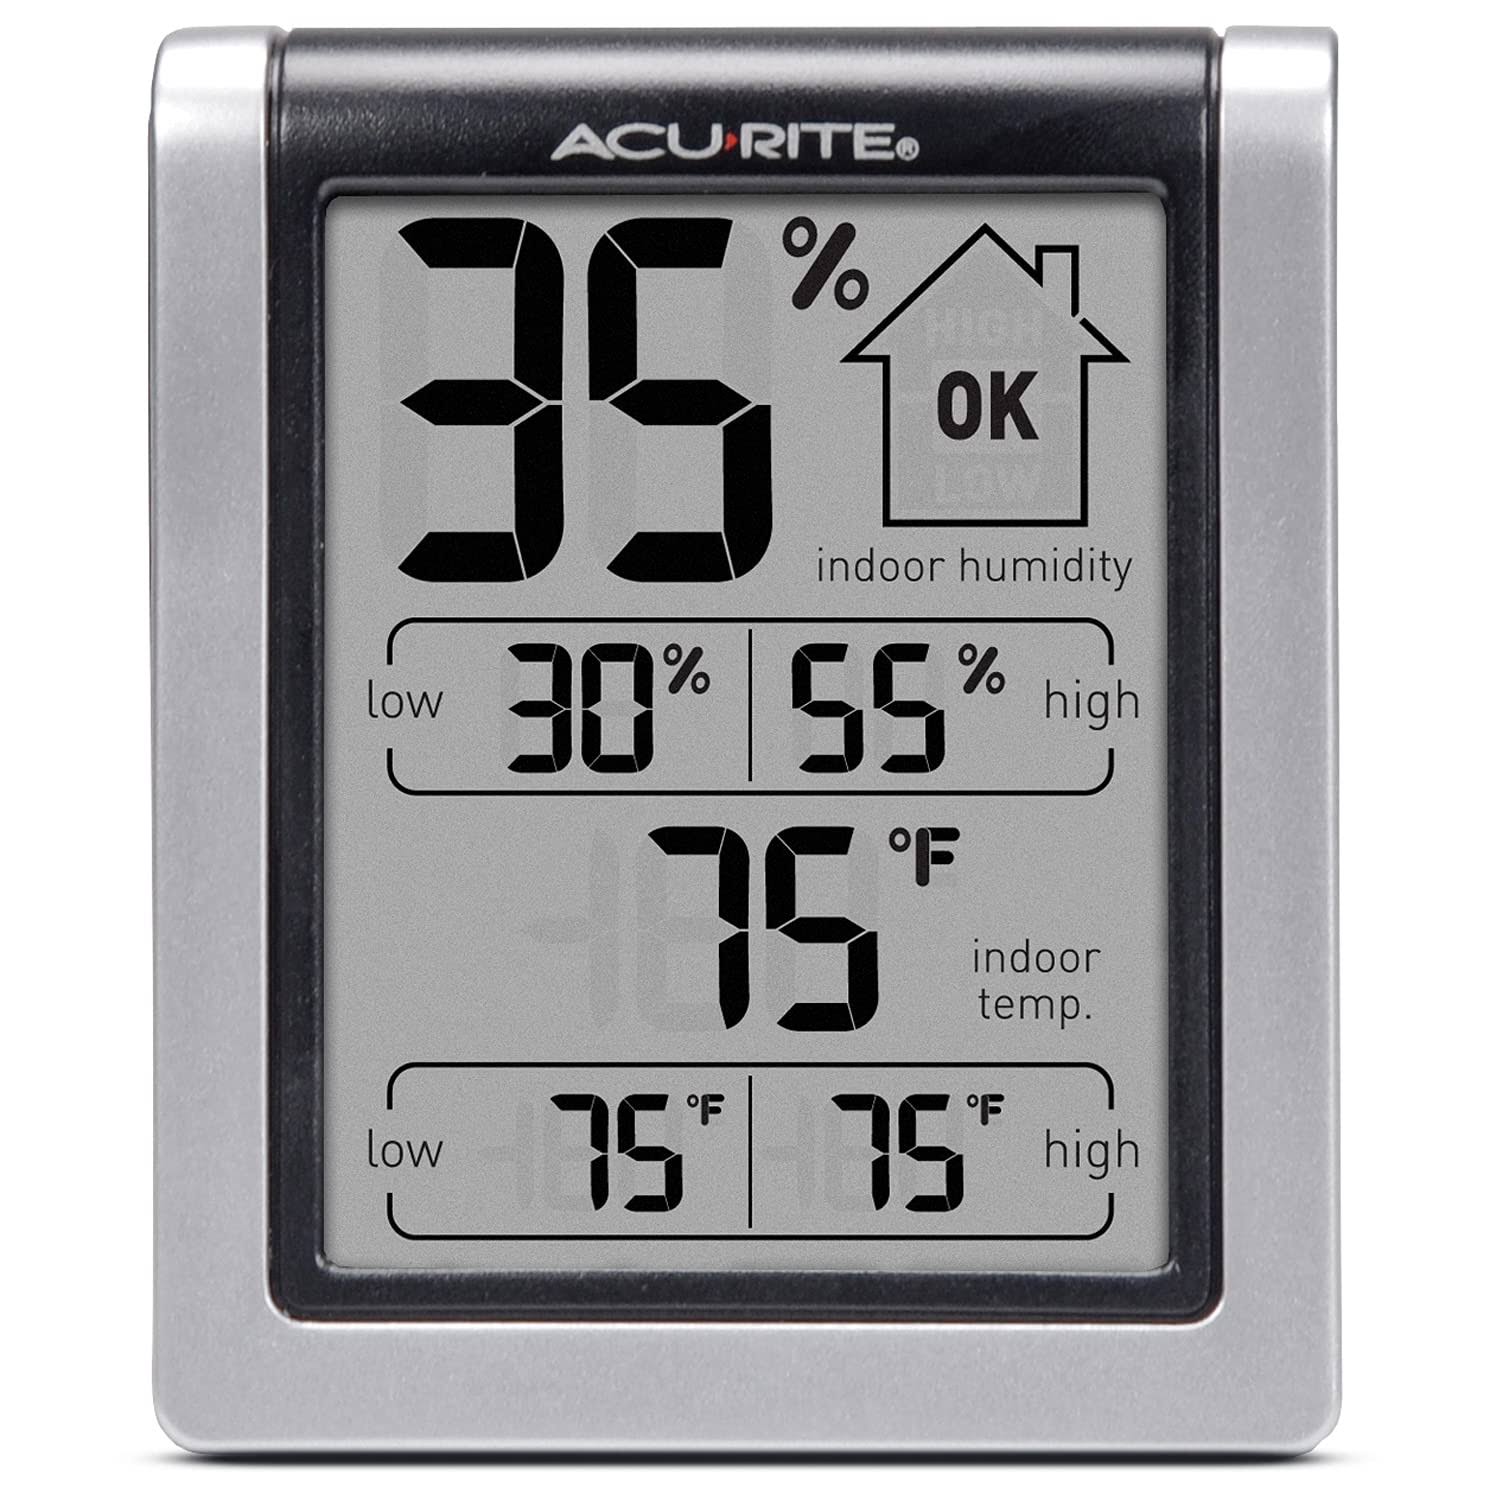 AcuRite 00613A1 Thermometer Temperature Weather Indoor Digital Humidity Monitor - Black/Silver